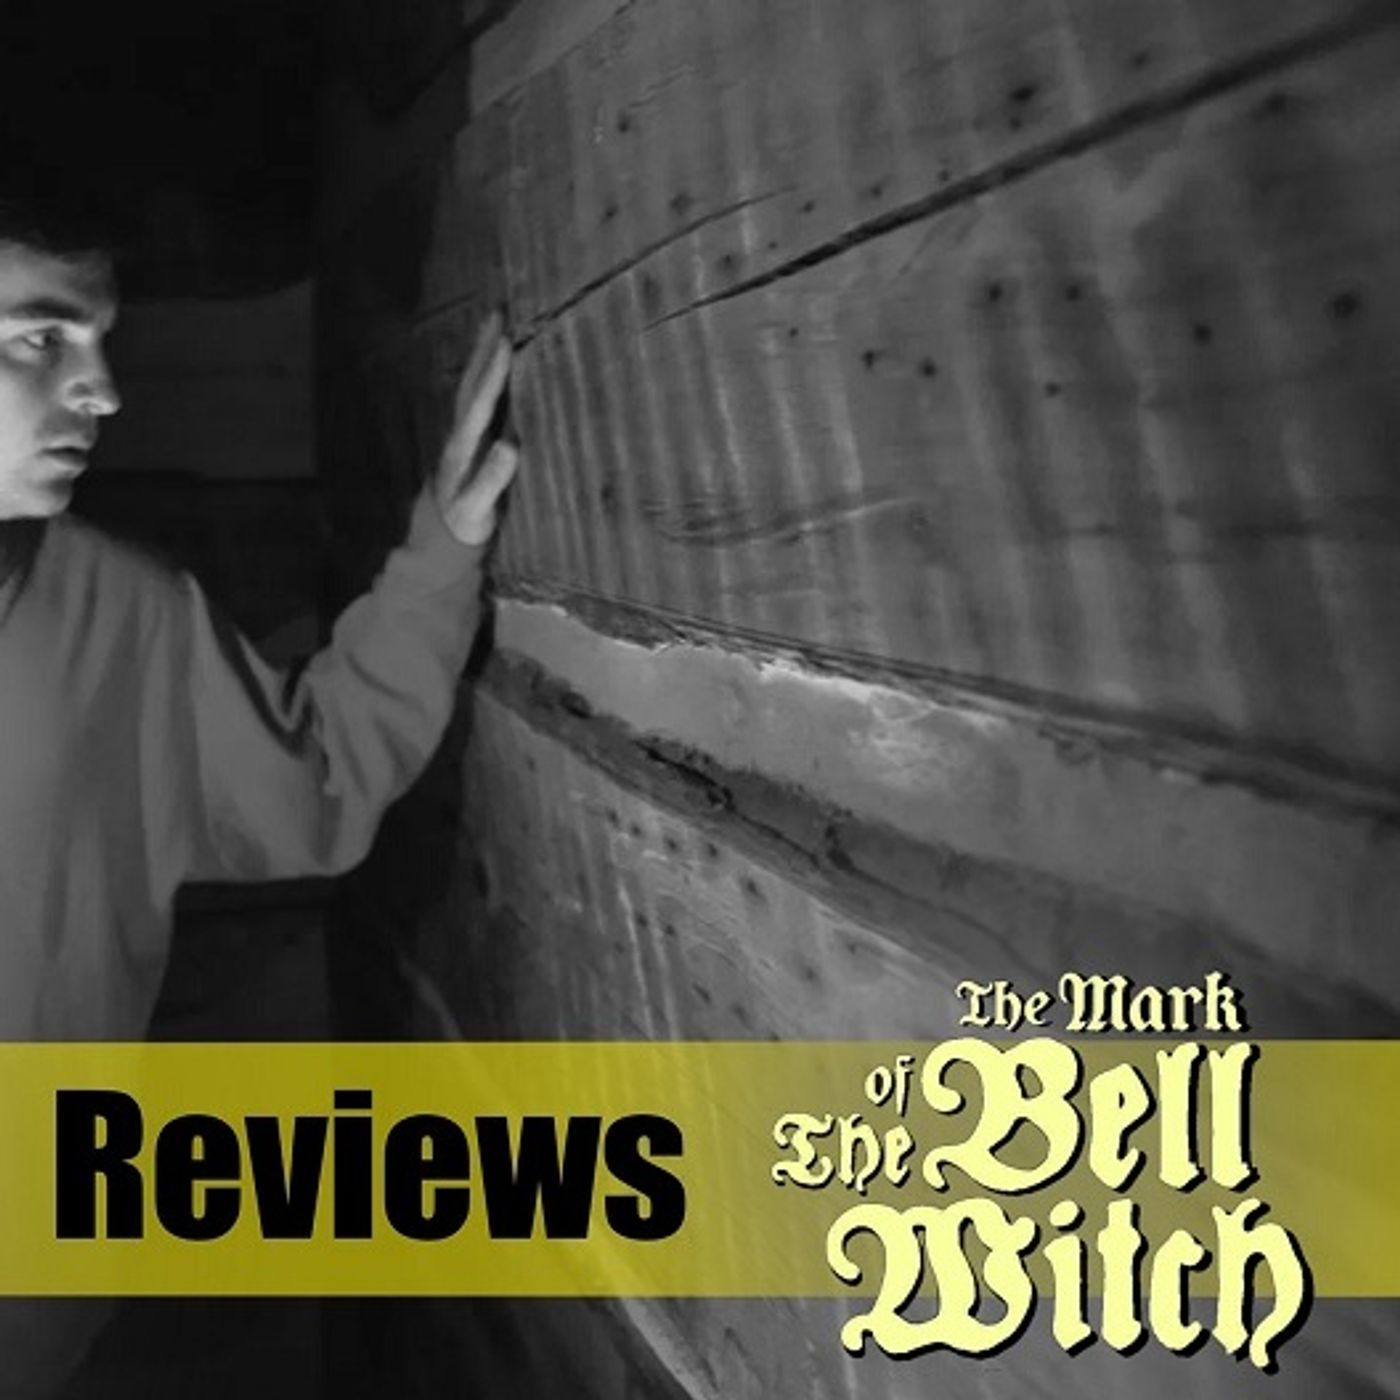 MOTN Reviews: Mark of the Bell Witch (2020)